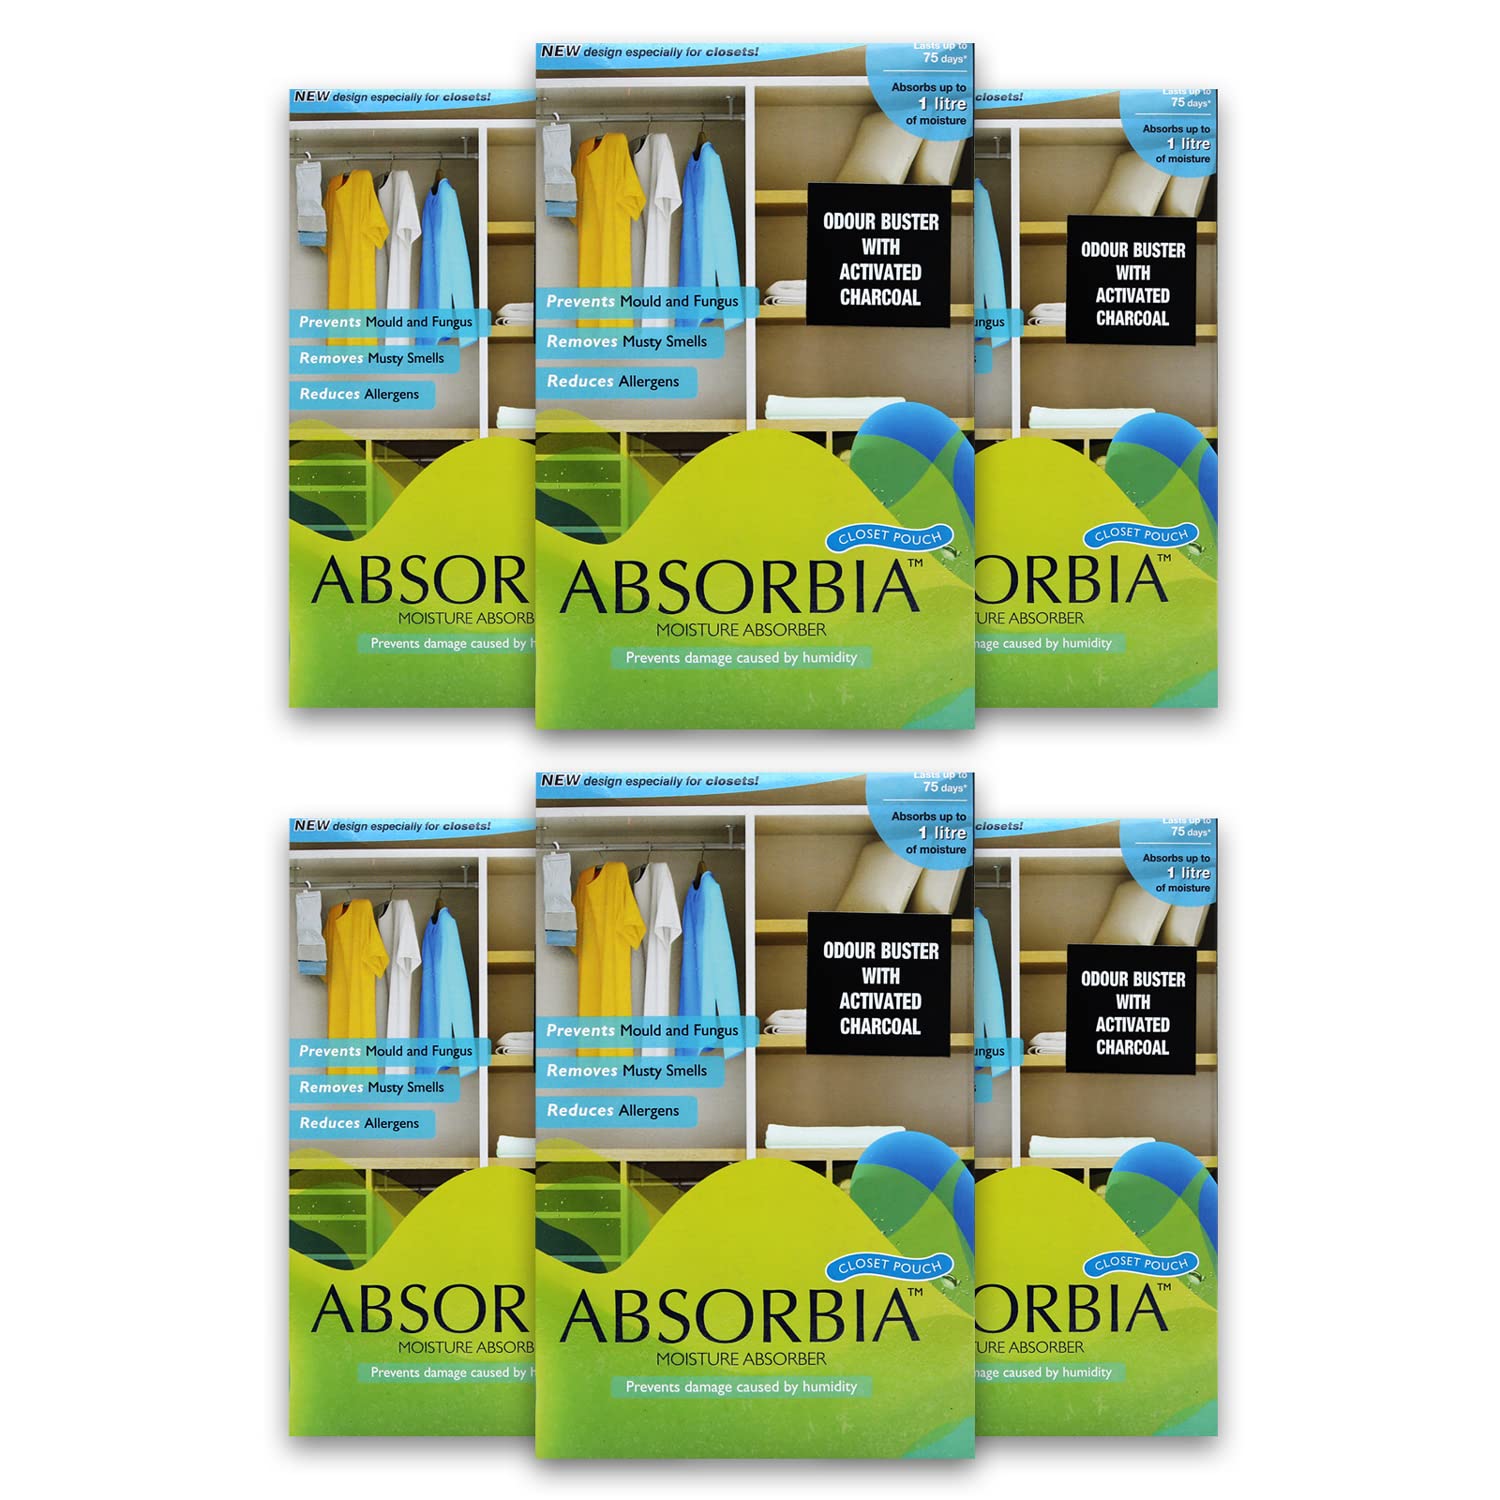 Absorbia Moisture Absorber Hanging Pouch with Activated Charcoal| Season Pack of 6 (440 gms X 6 pouches) | Absorption Capacity 1000ml Each| Dehumidifier for Wardrobe, Closet & Bathroom| Fights Against Moisture, Mould, Fungus & Musty Smells